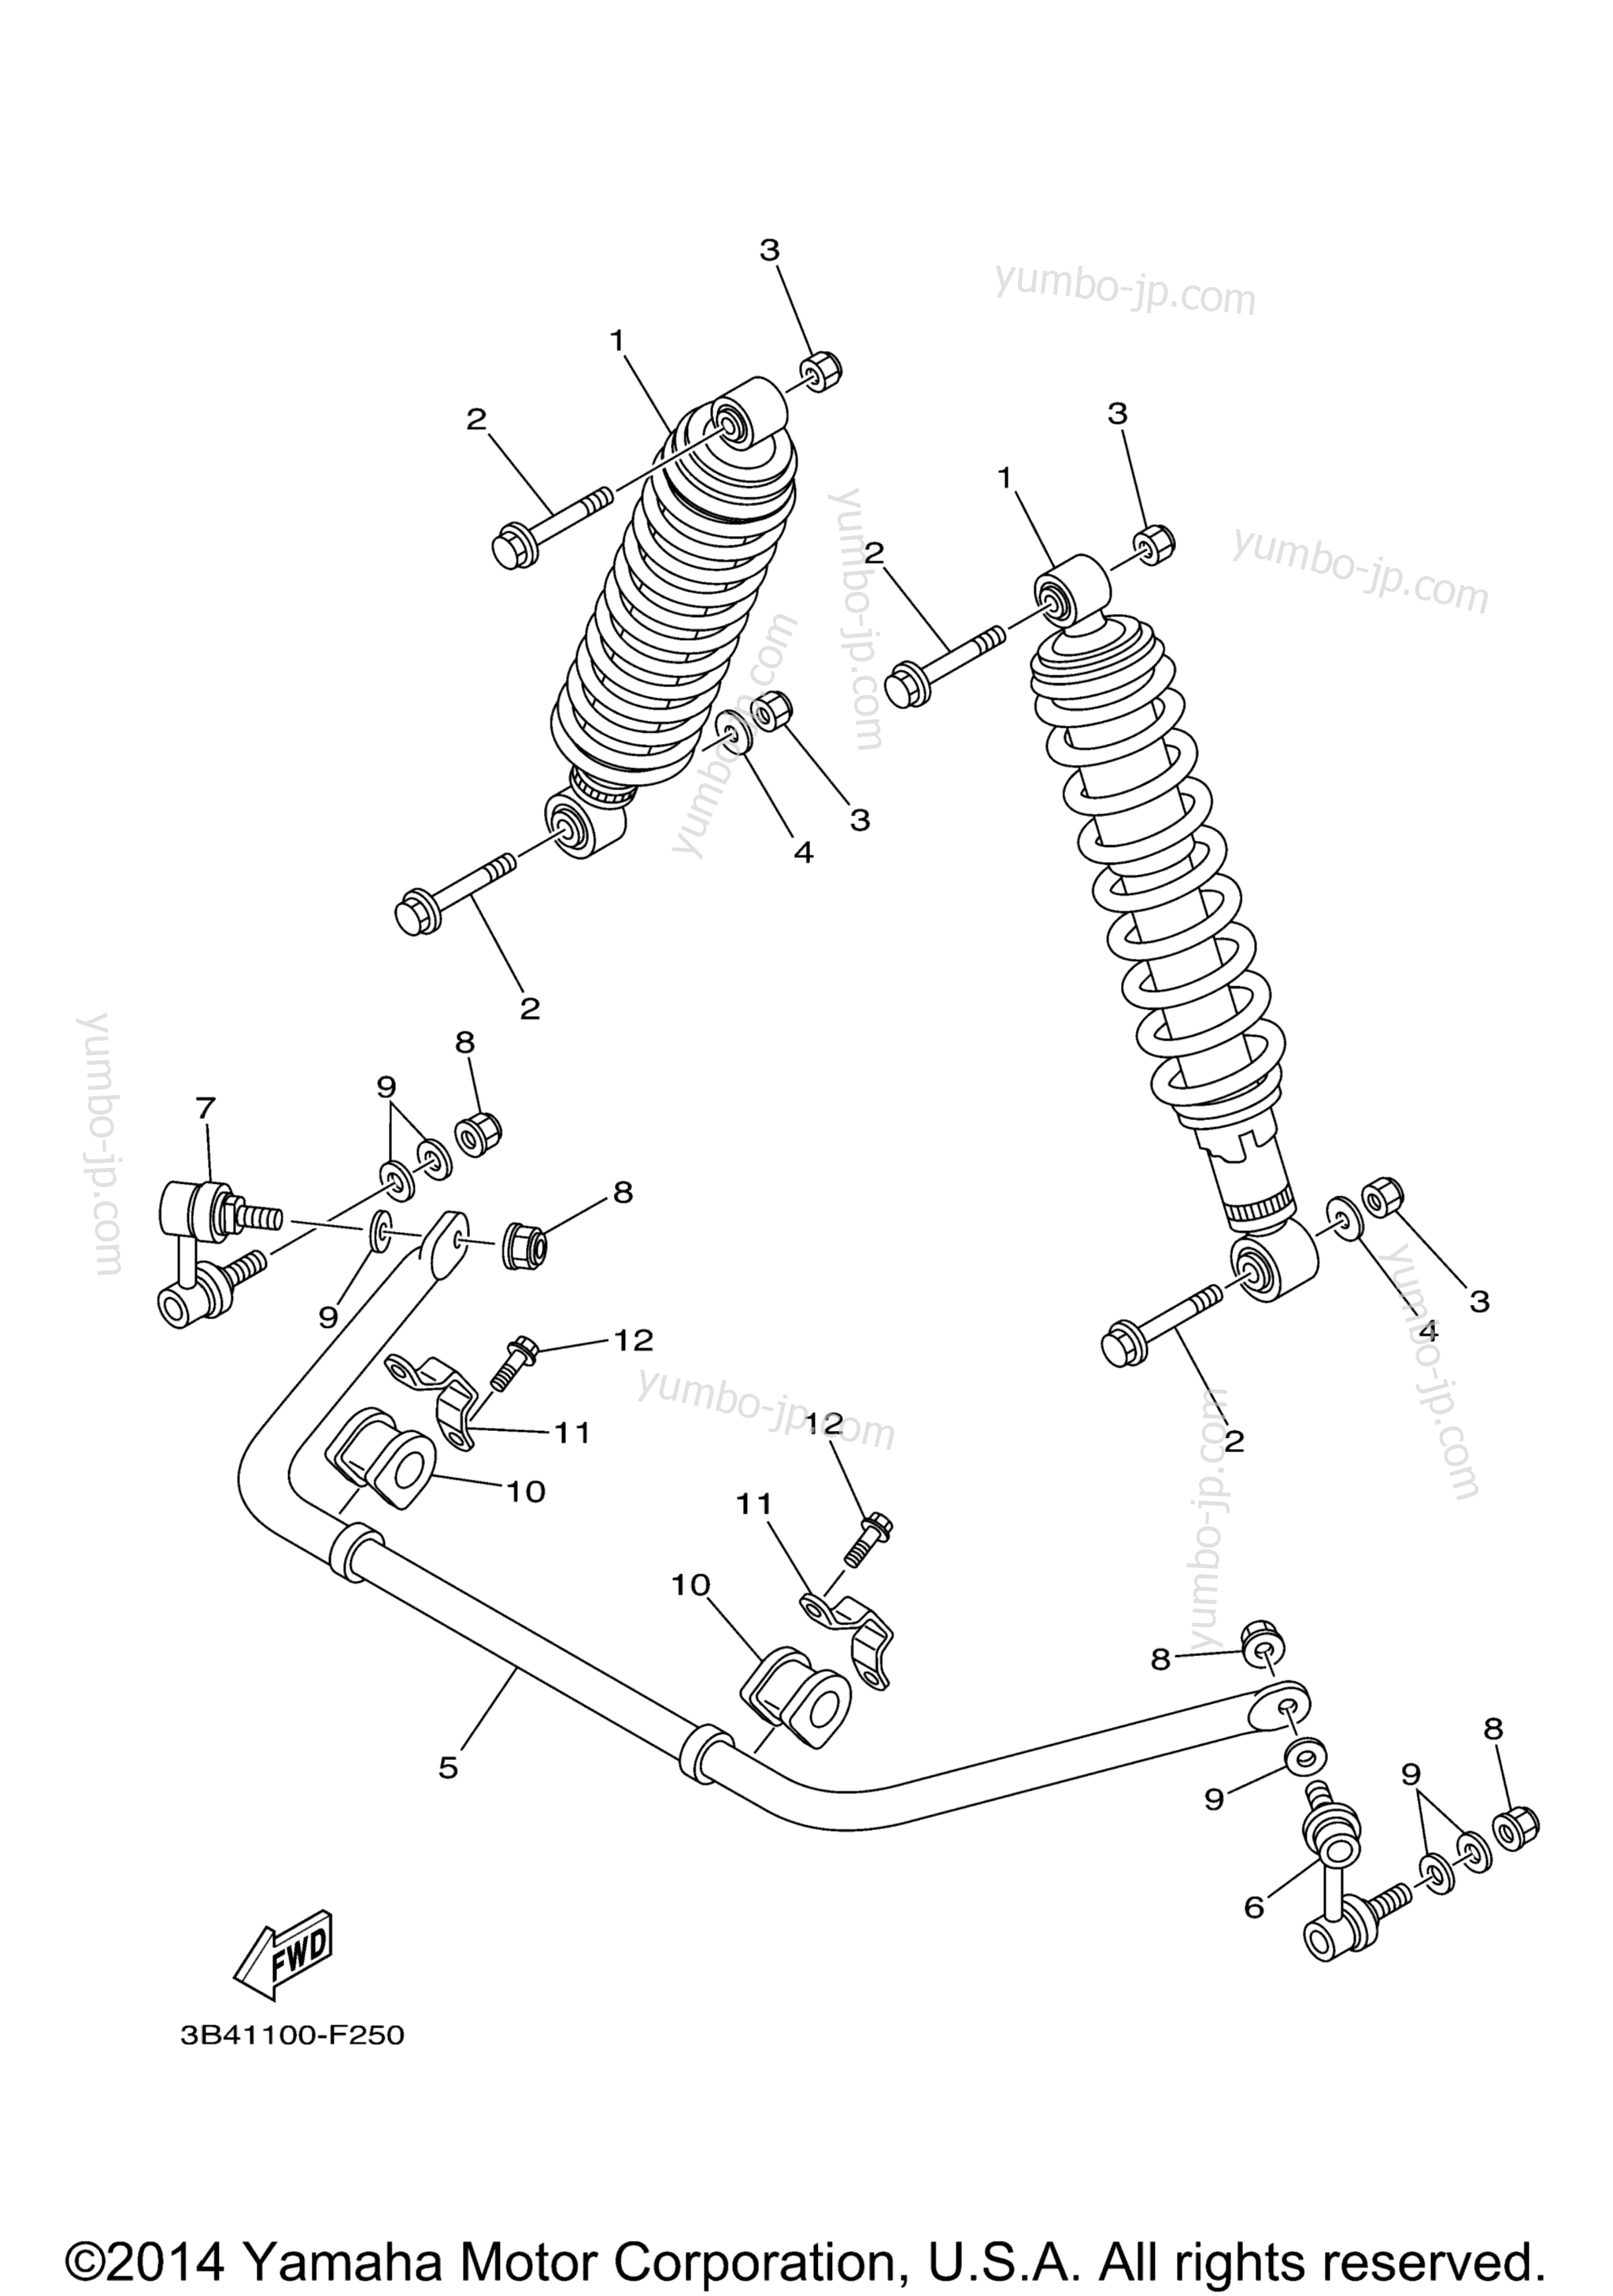 Rear Suspension for ATVs YAMAHA GRIZZLY 550 FI EPS 4WD (YFM5FGPYB) 2009 year